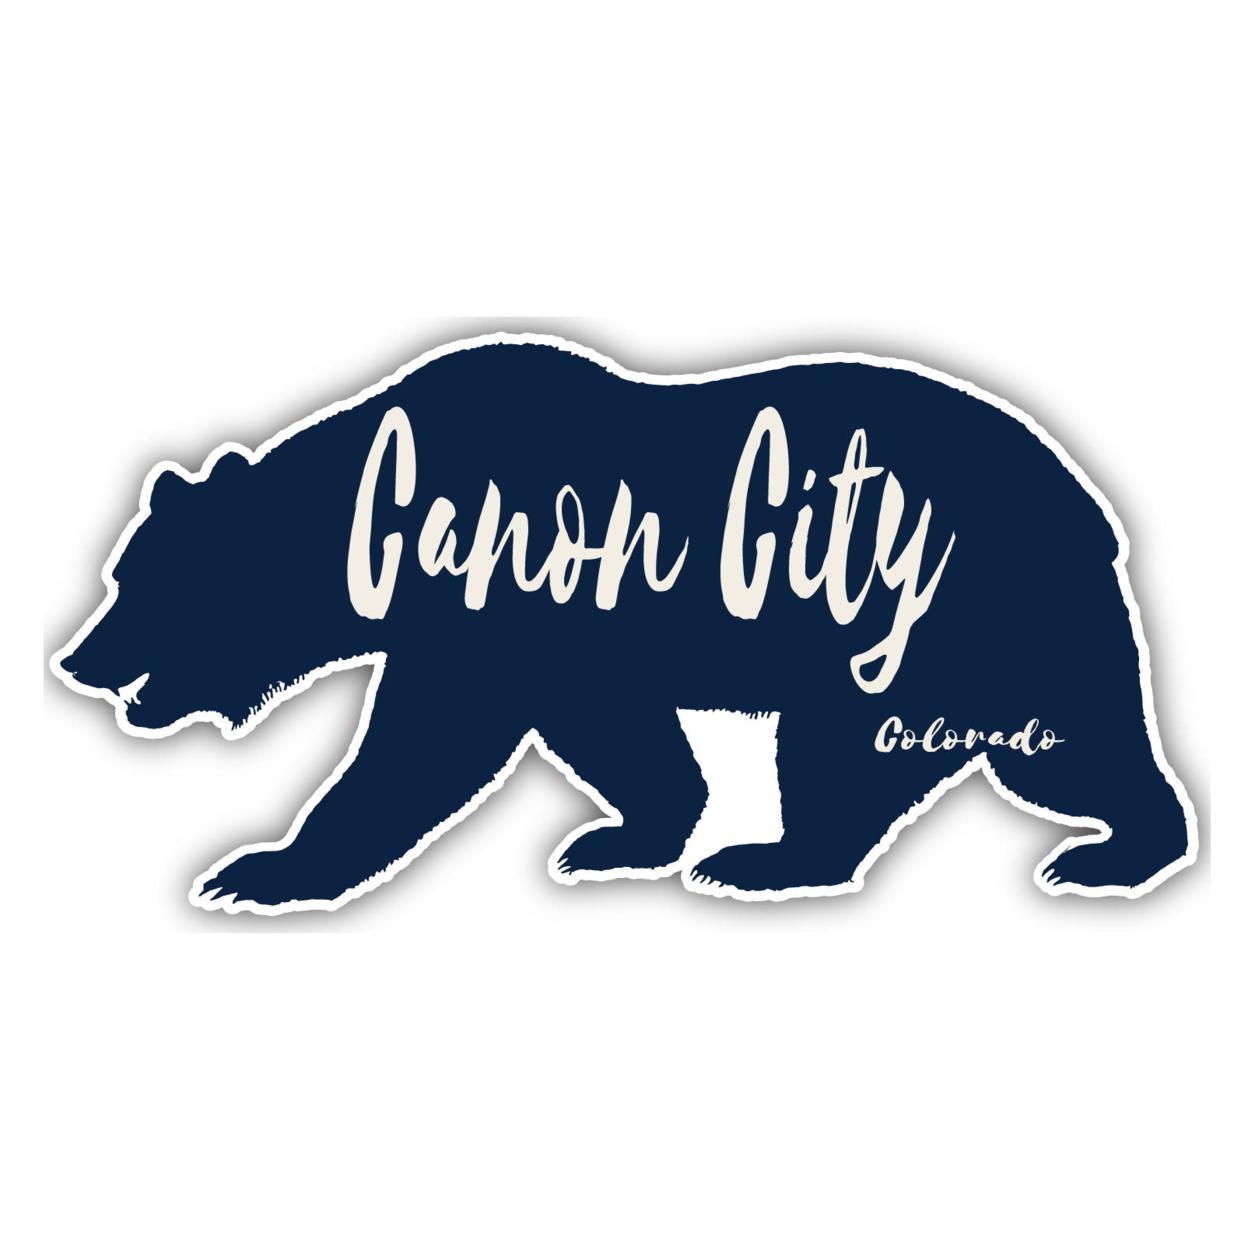 Canon City Colorado Souvenir Decorative Stickers (Choose Theme And Size) - 4-Pack, 12-Inch, Camp Life